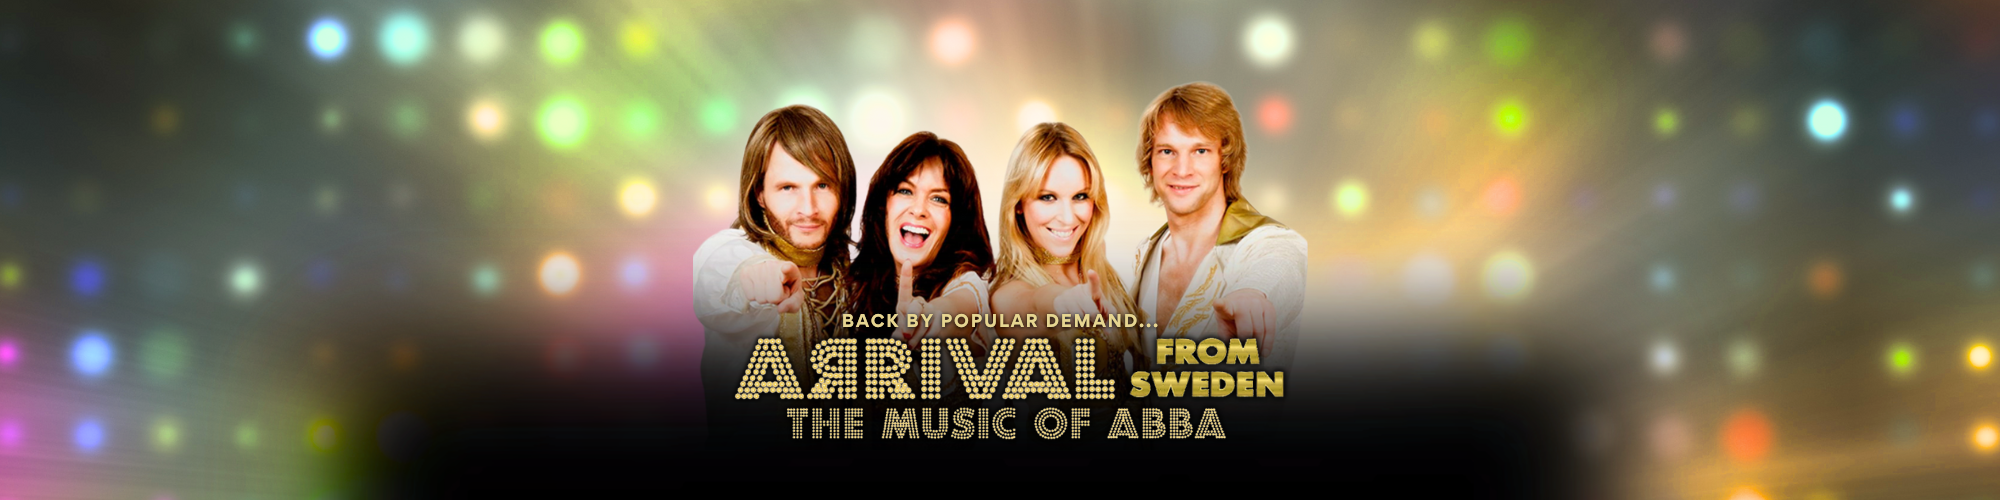 Arrival From Sweden: The Music of ABBA